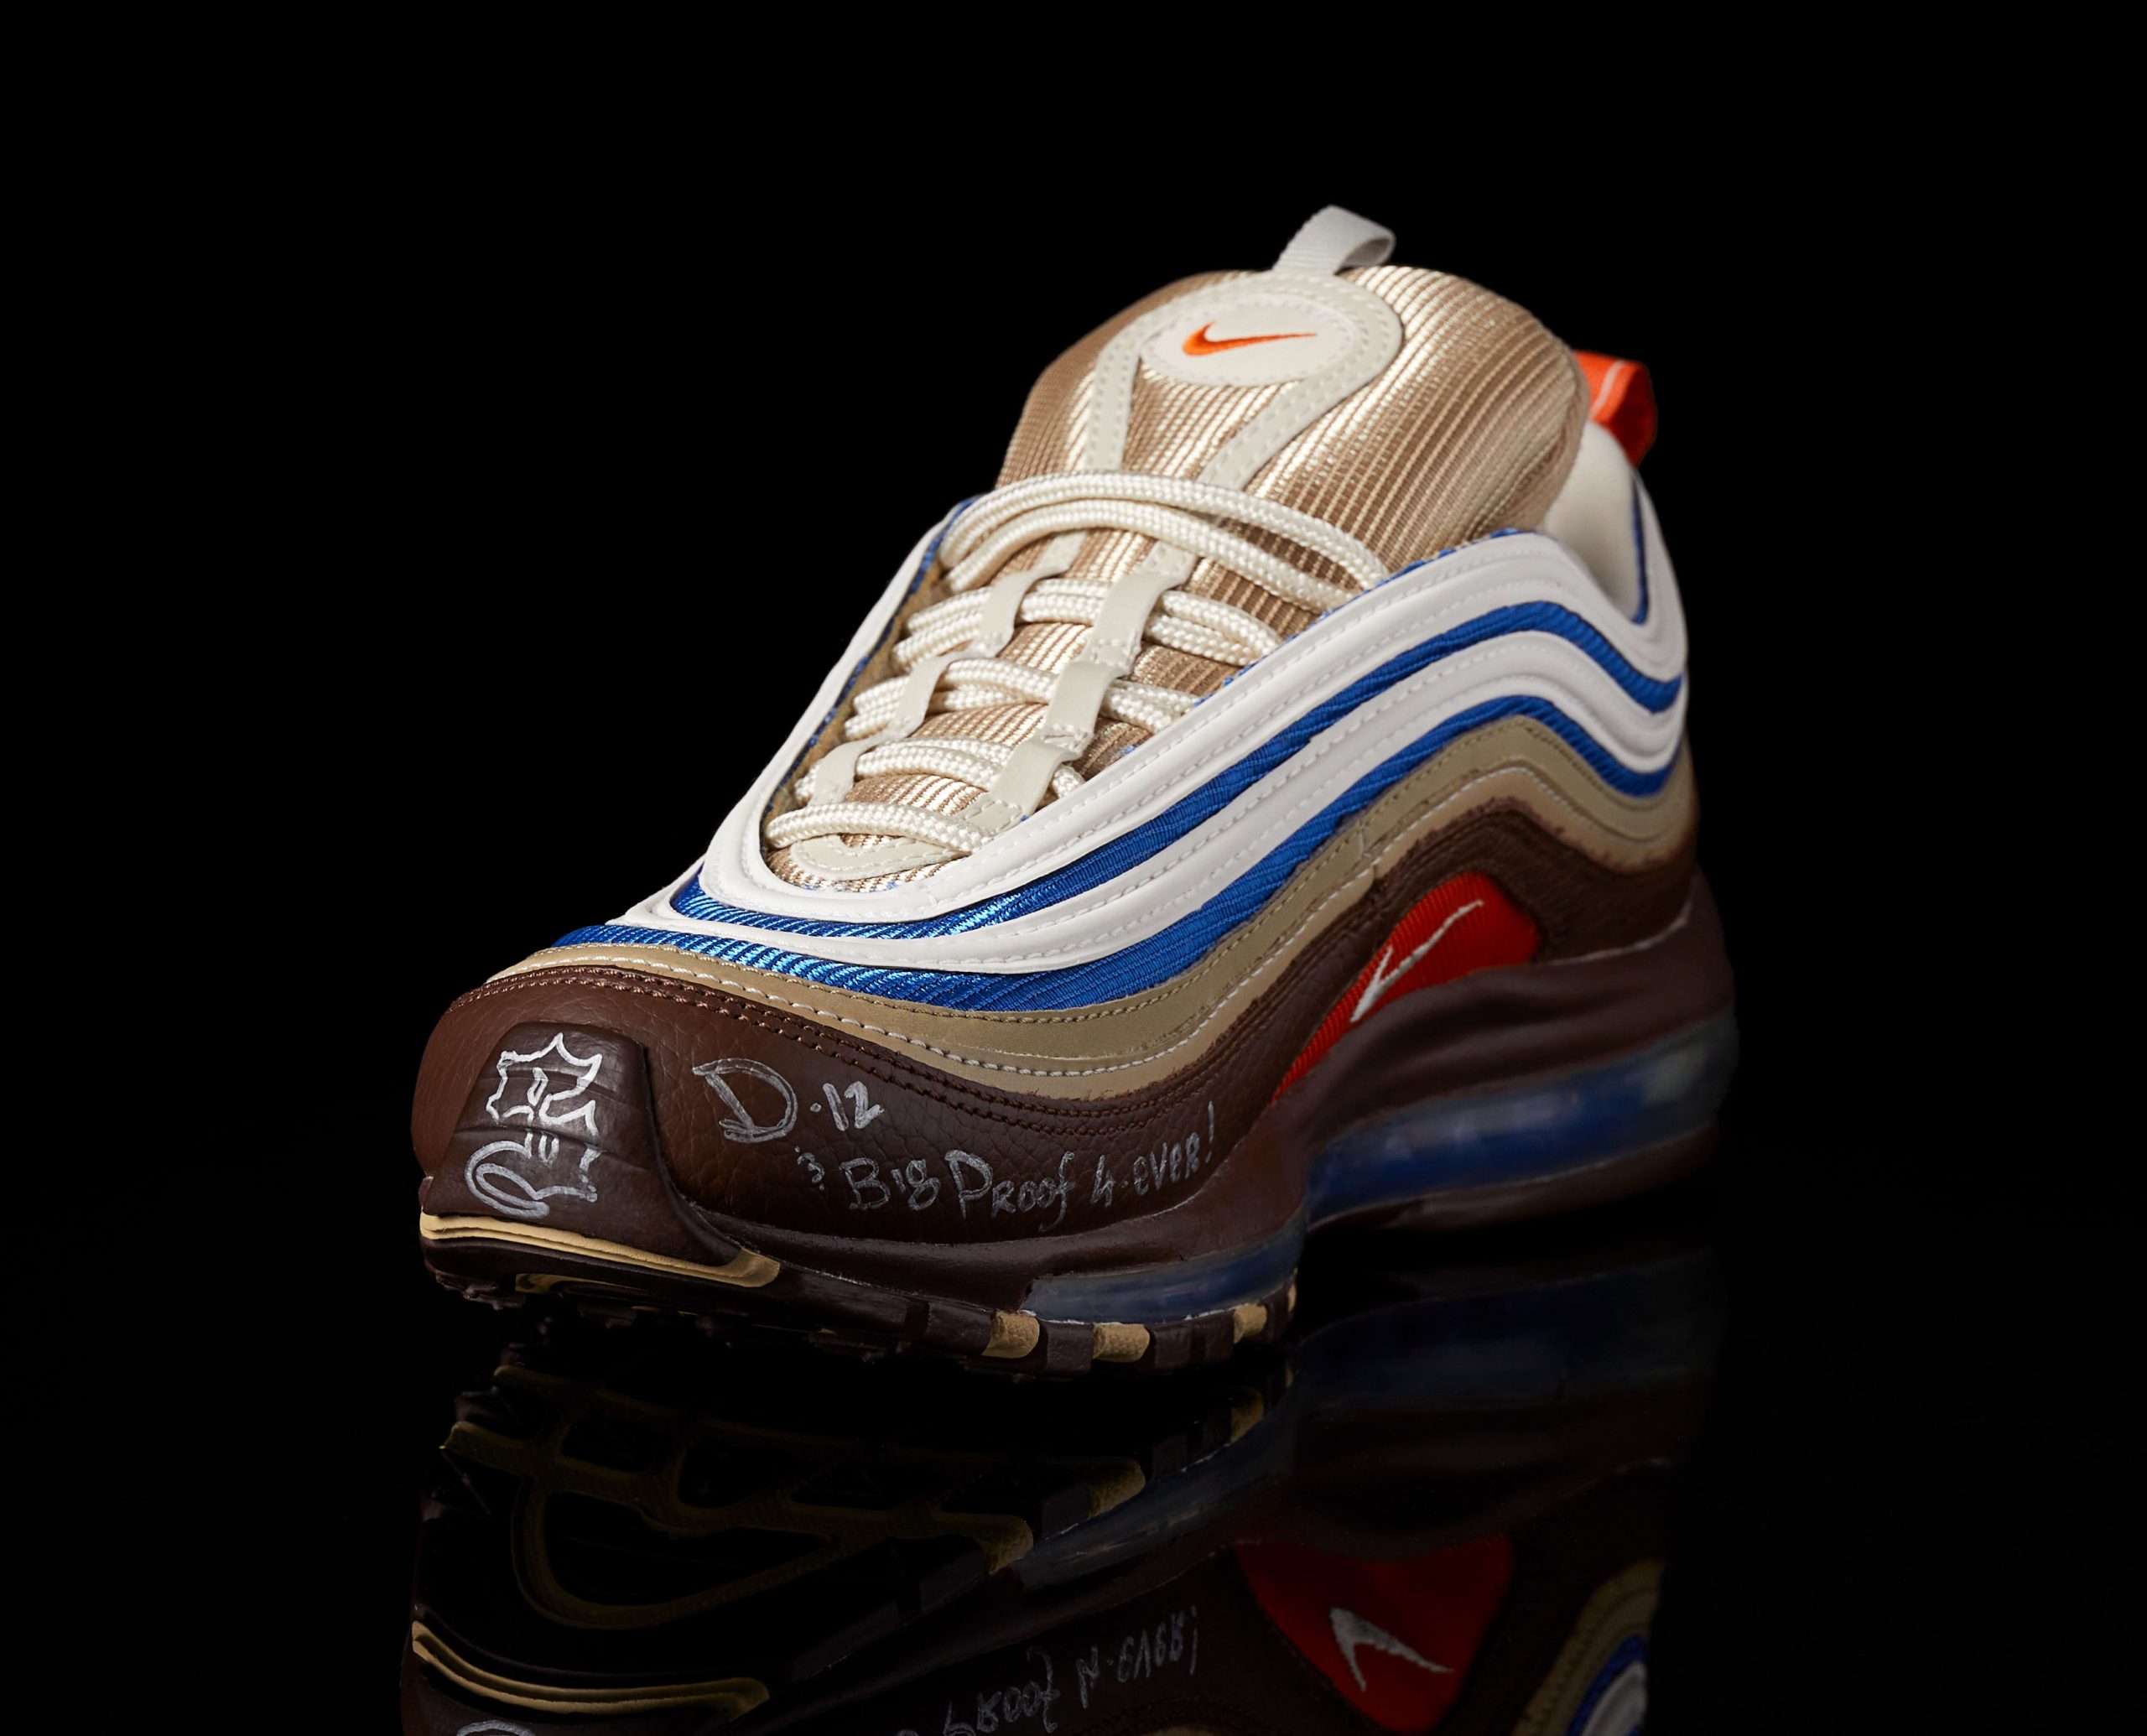 A Complete History of Eminems Signature Sneakers - Charity Nike Air Max 95  by Paul Rosenberg “Goliath” – 2006